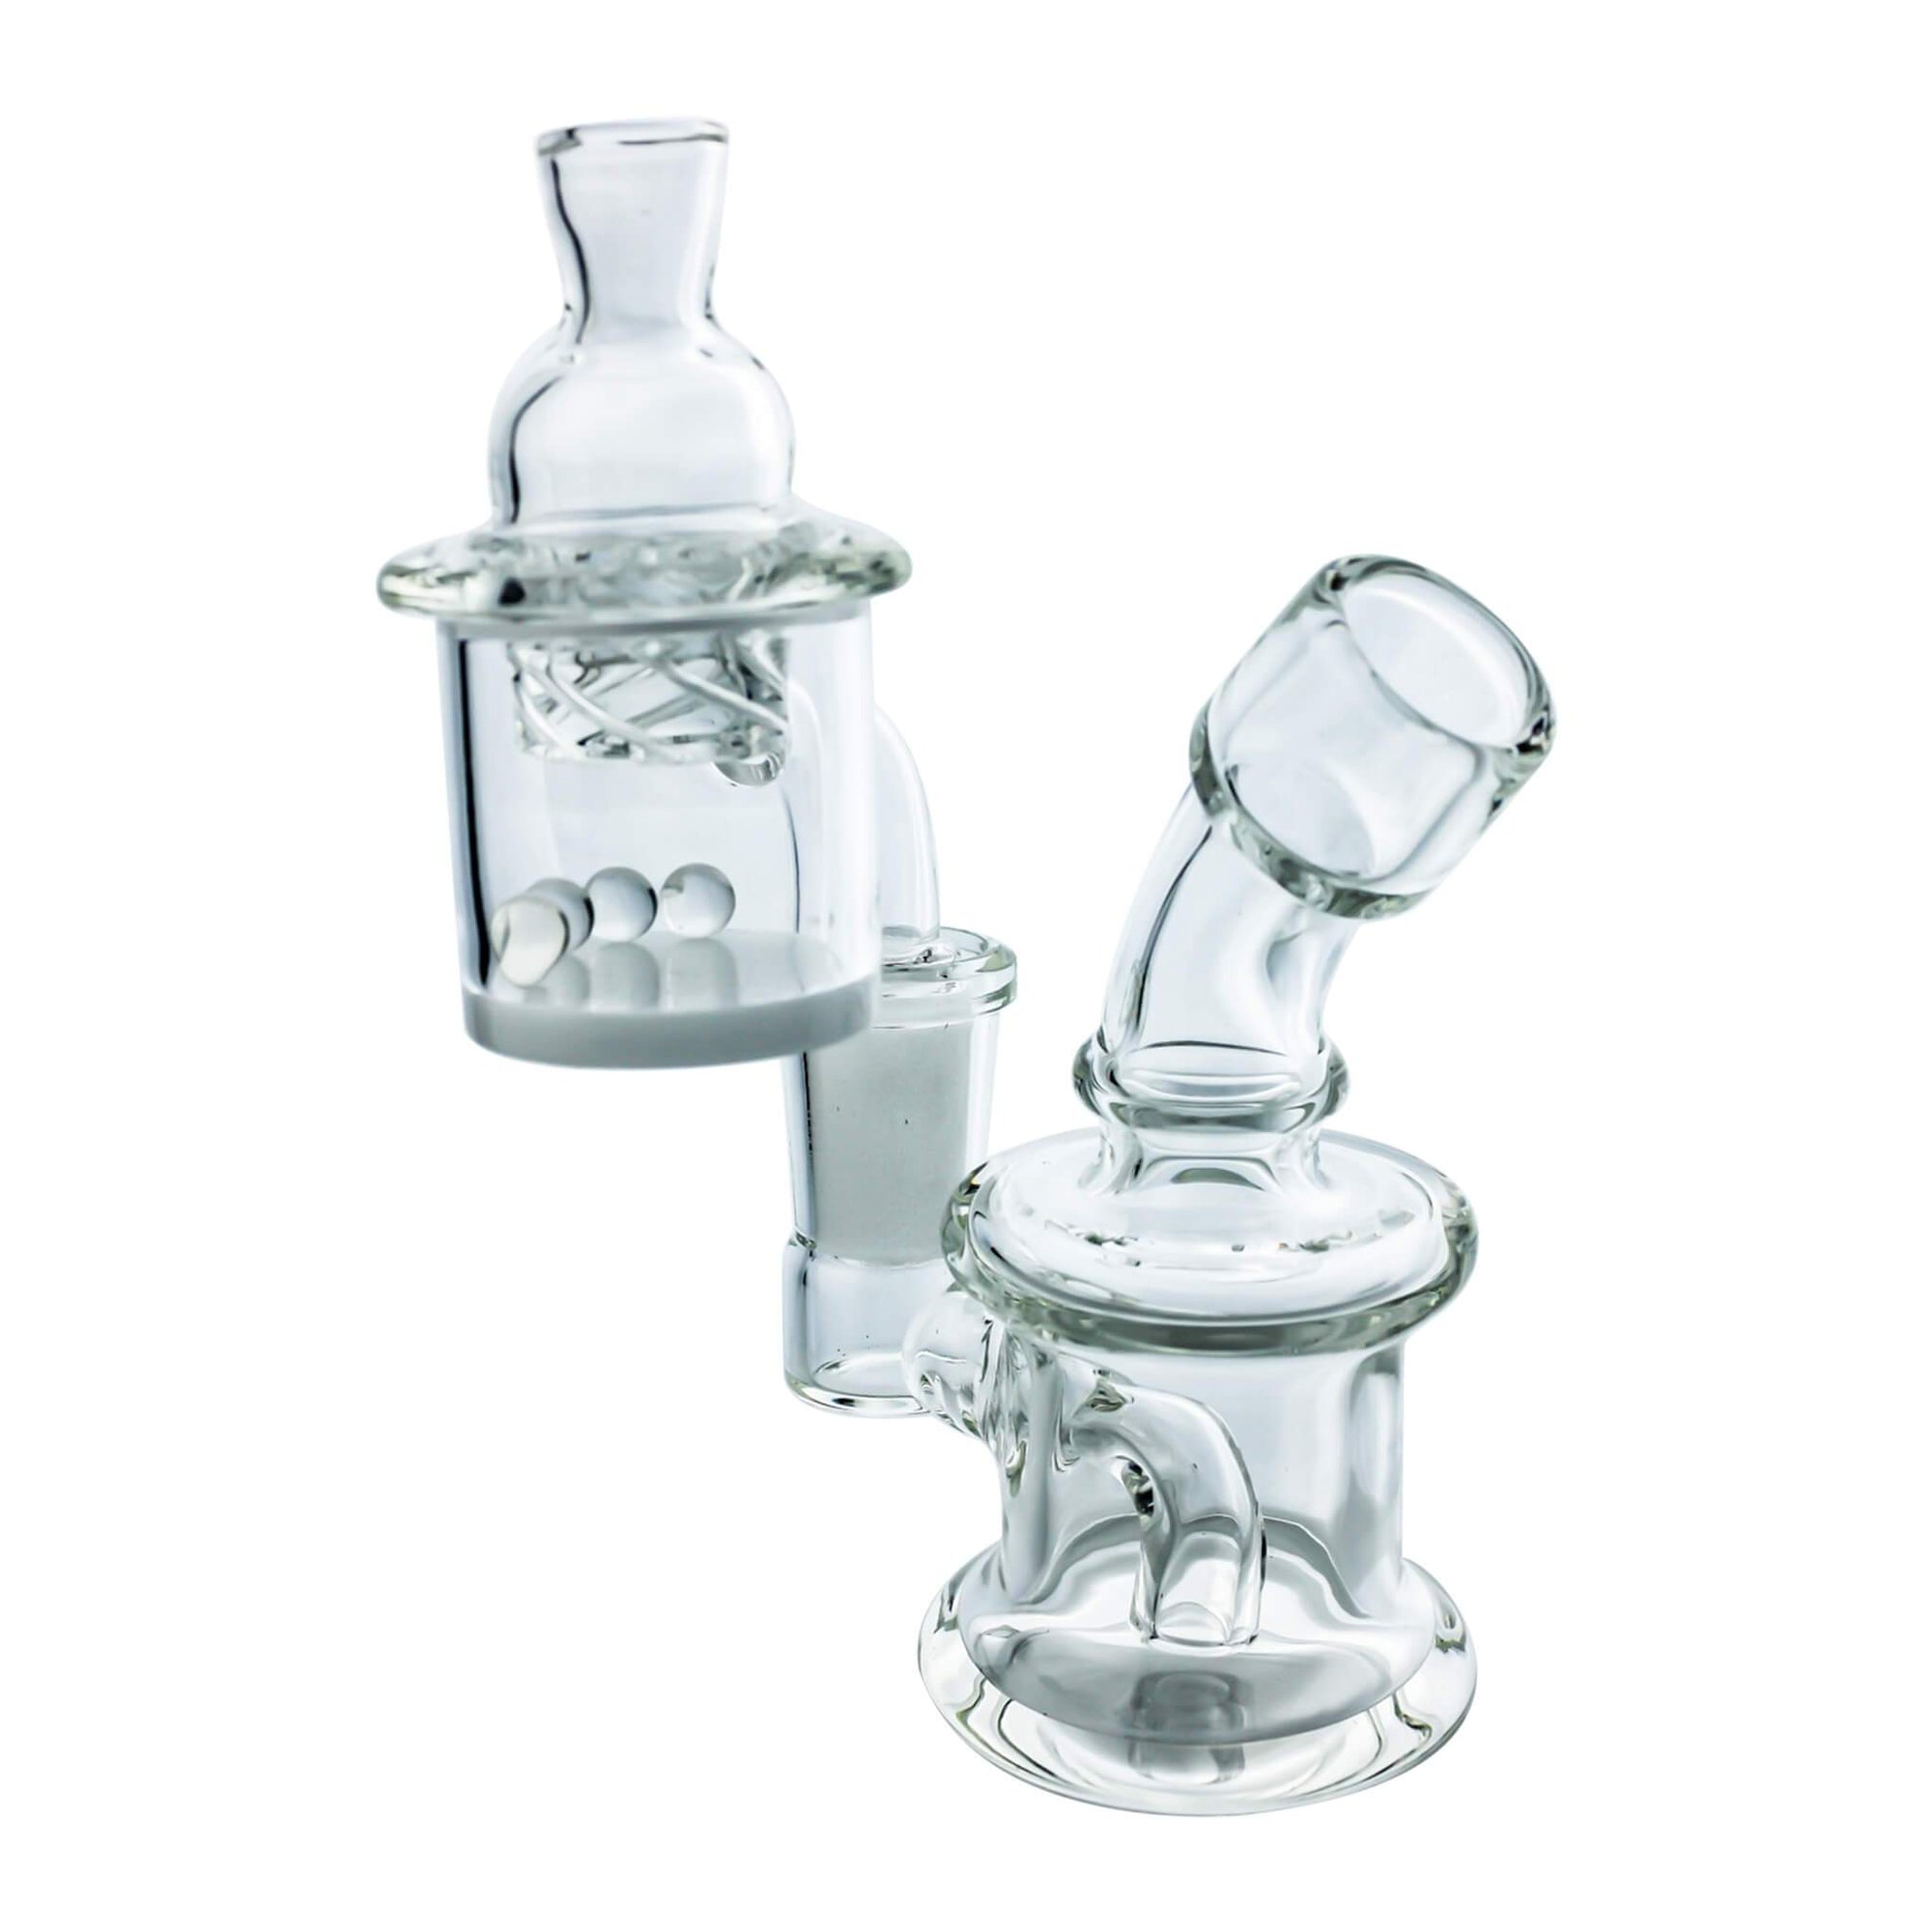 Tiny Hand Dab Rig Complete Kit #6 | Clear Carb Cap Quartz Pearls View | the dabbing specialists